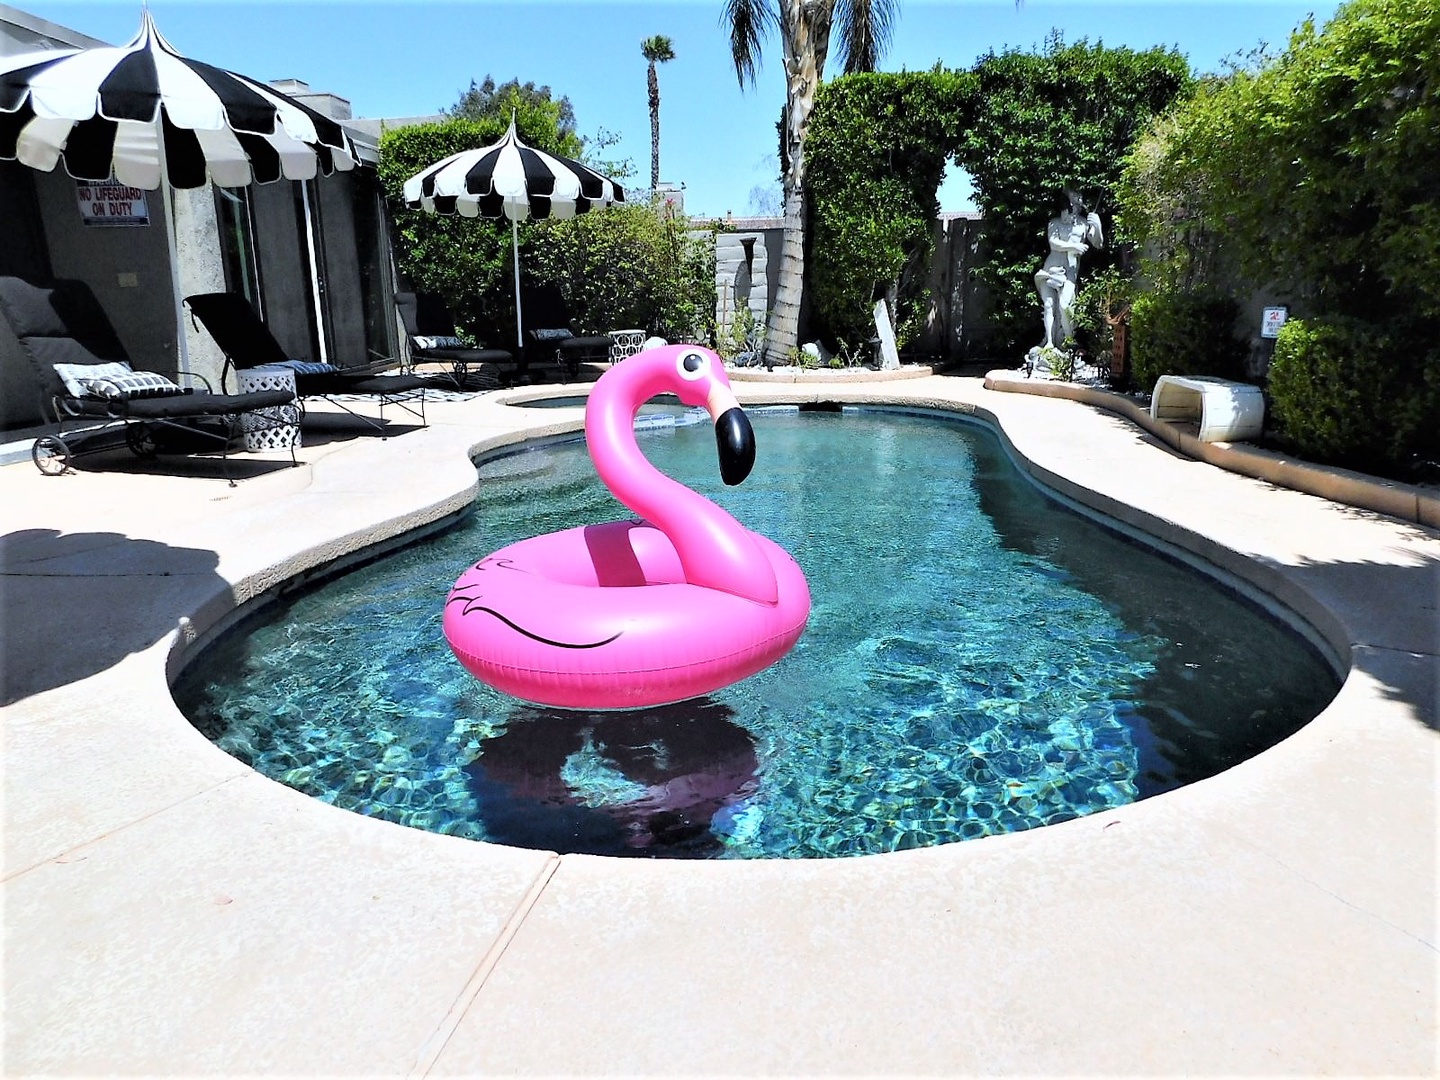 Private instagrammable pool with flamingo floater!